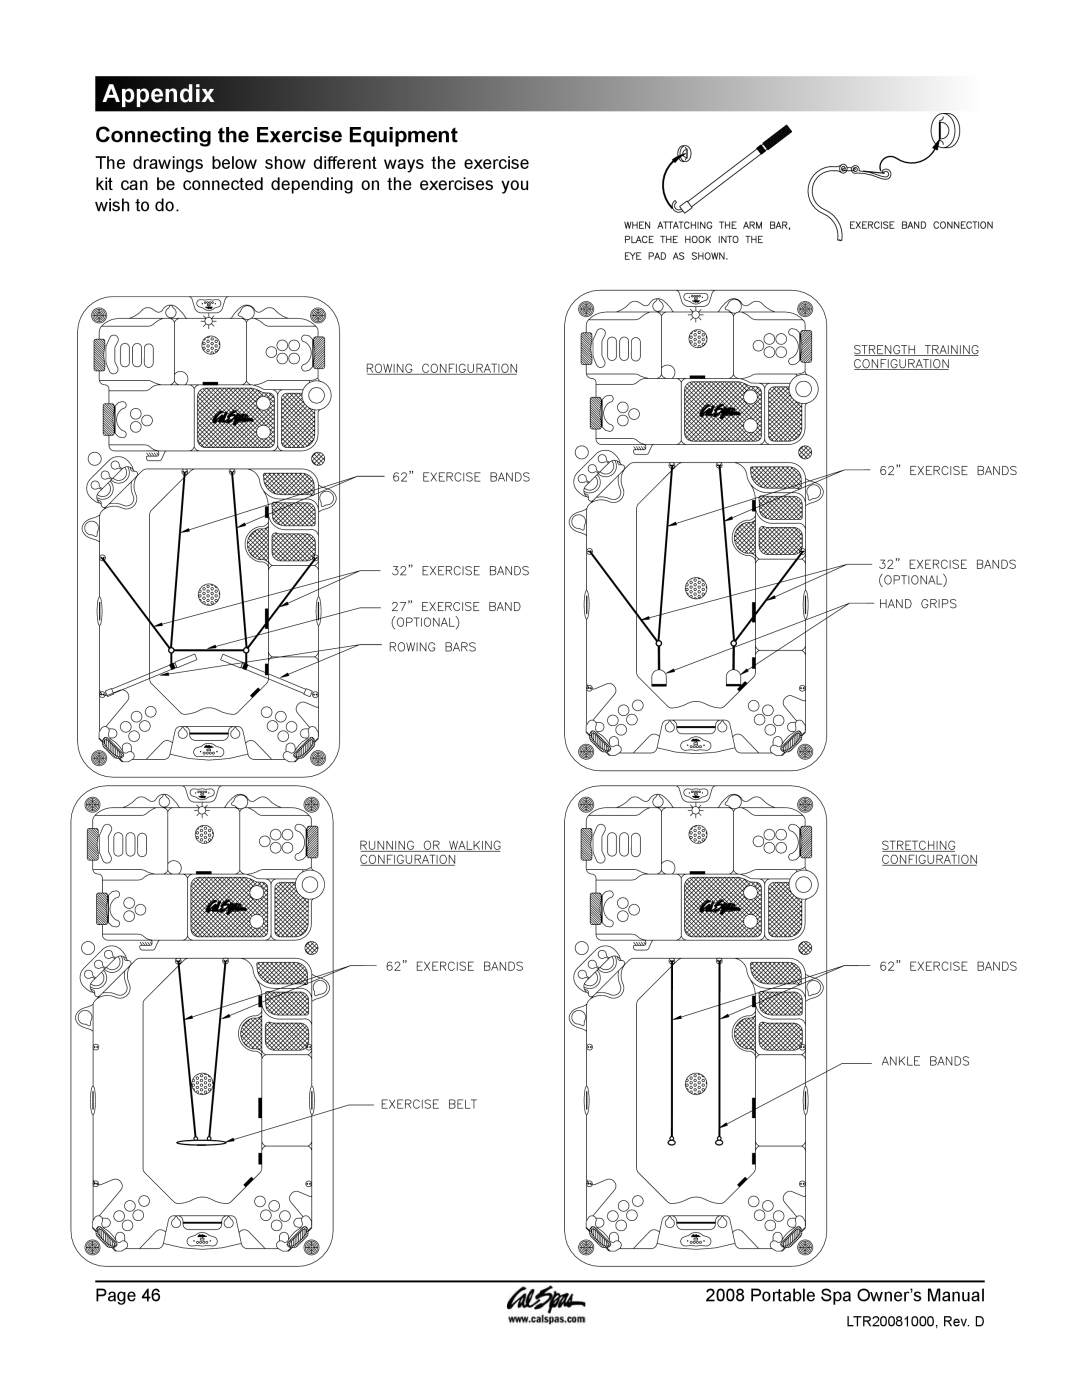 Cal Spas GFCI manual Connecting the Exercise Equipment, Appendix, Page 